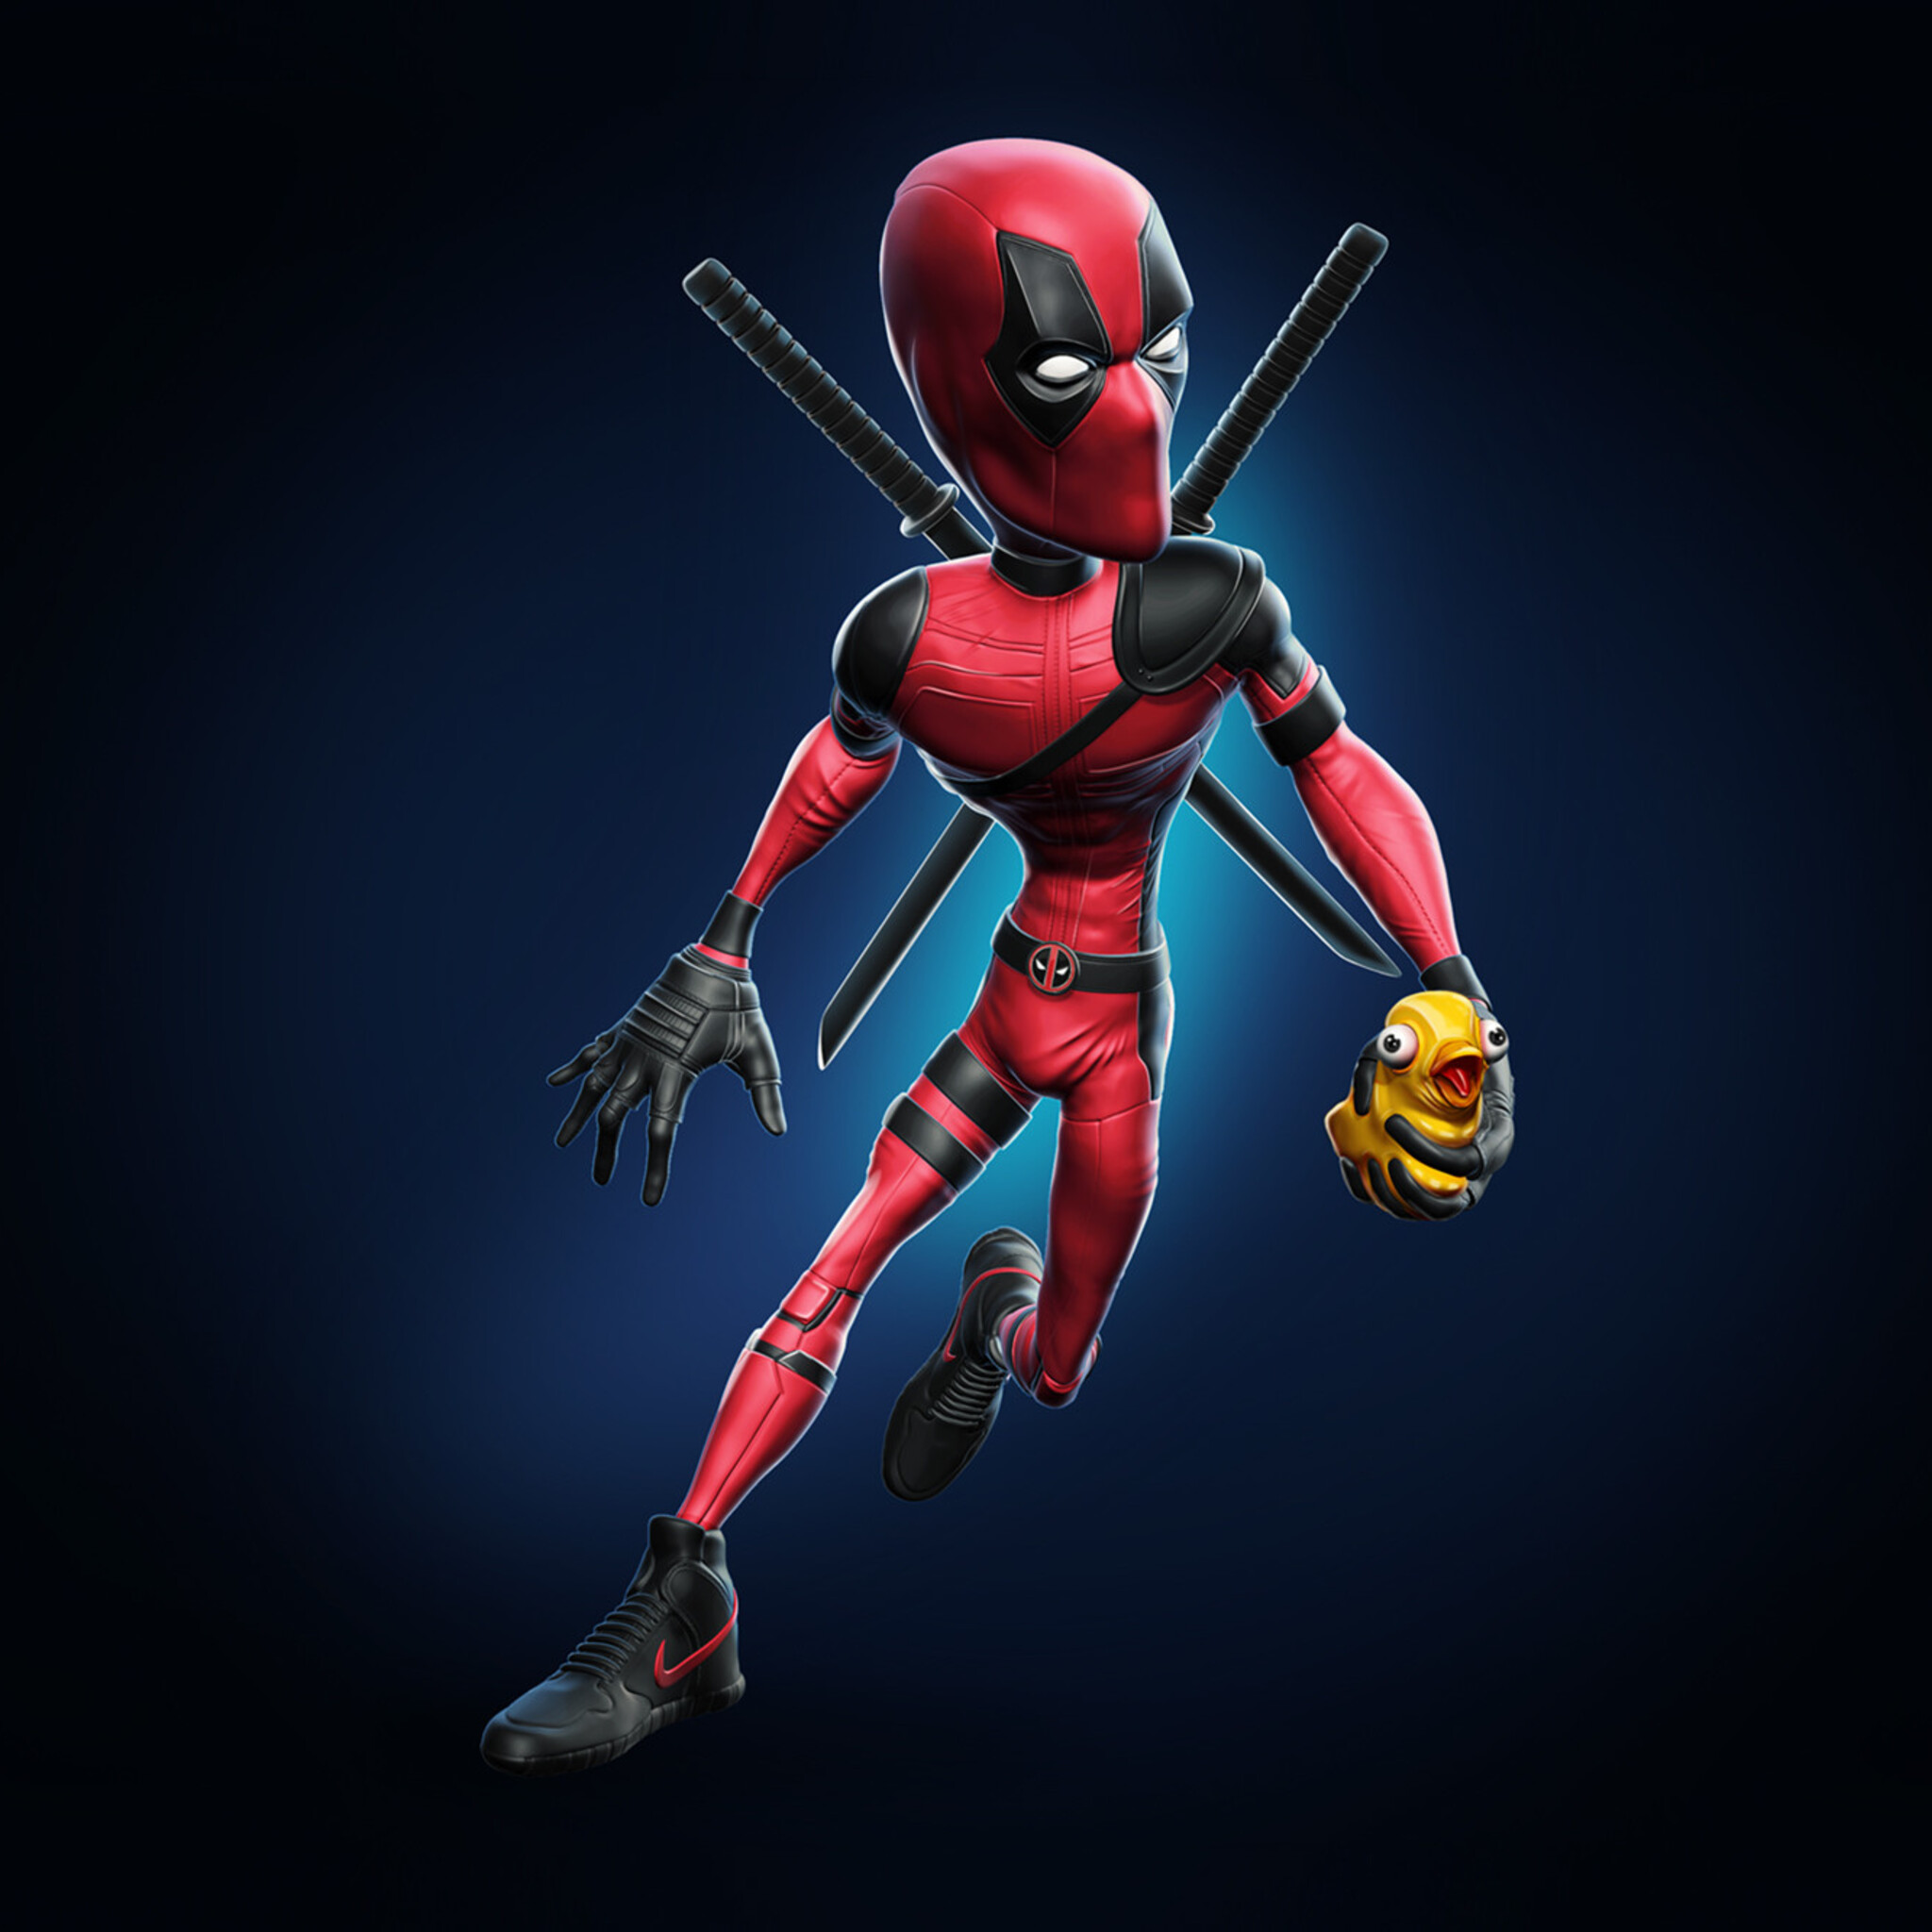 2048x2048 Deadpool Wearing Nike Shoes Holding Duck Toy Ipad Air Hd